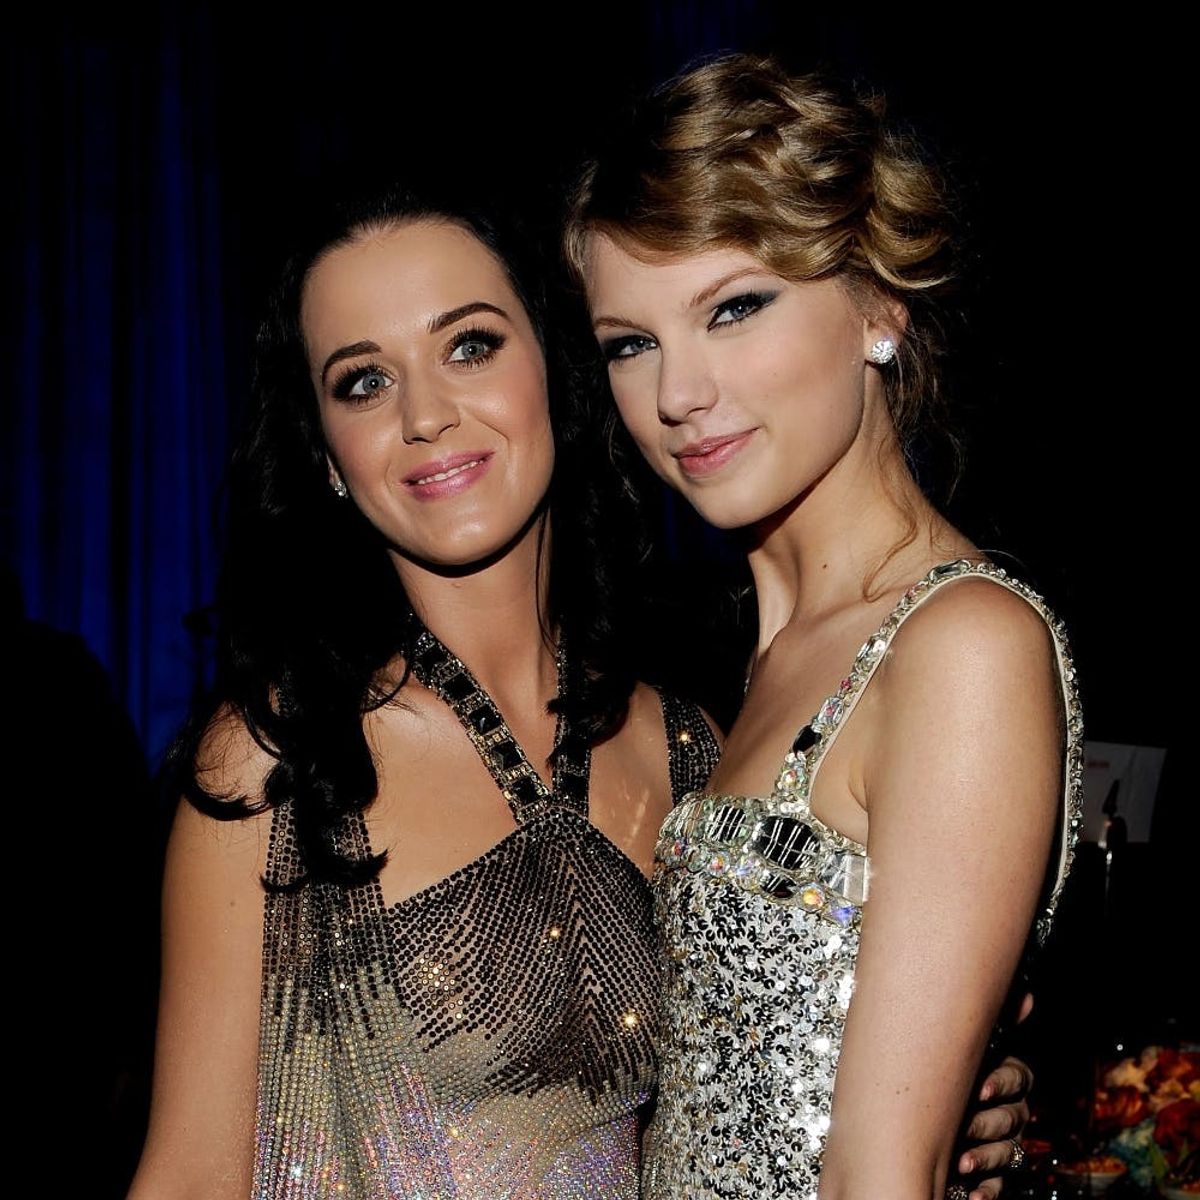 Katy Perry Says She’s “Always” Loved Taylor Swift Despite Their Nasty Feud